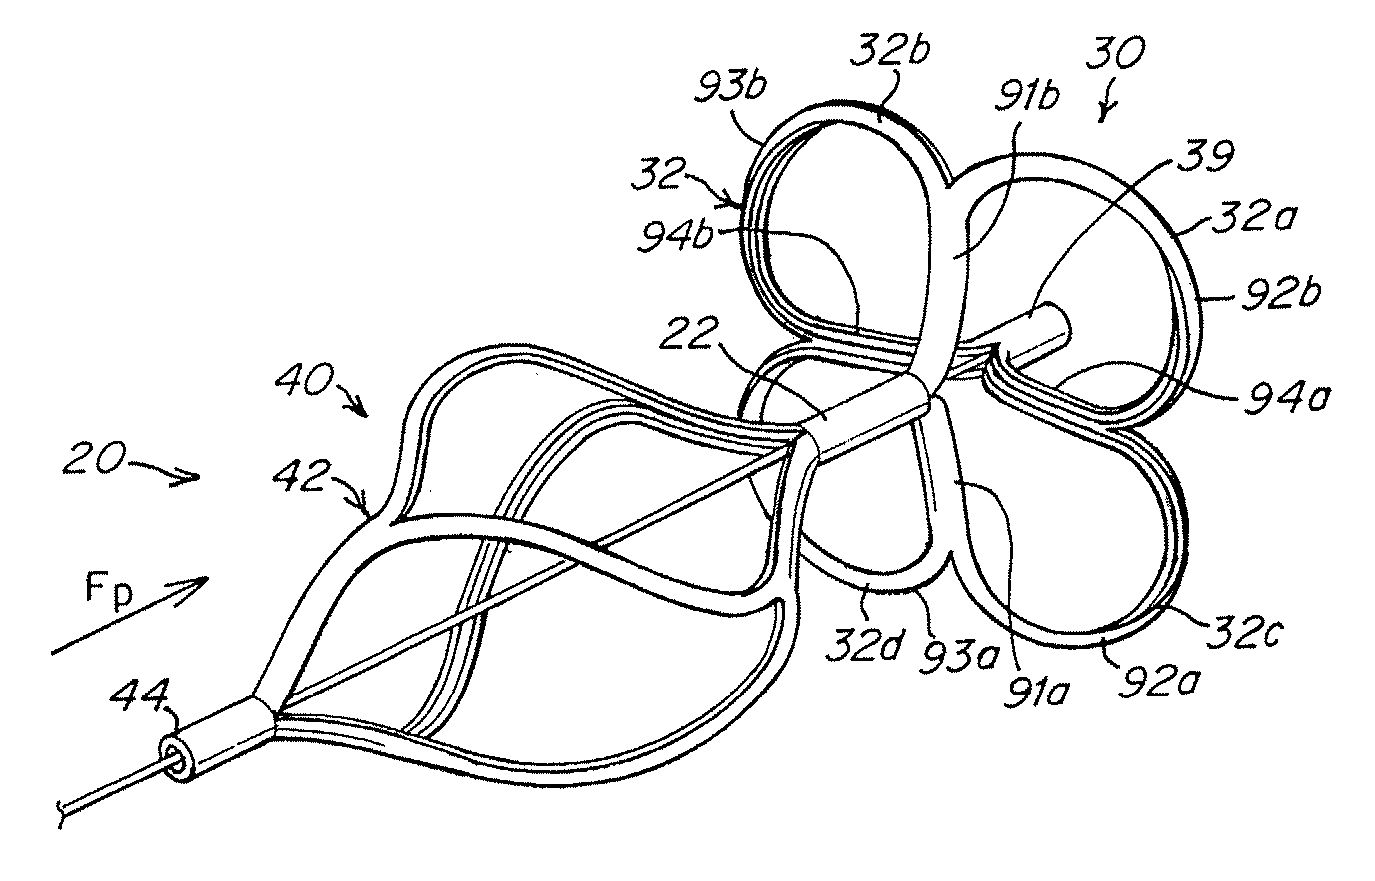 Scaffold for tubular septal occluder device and techniques for attachment